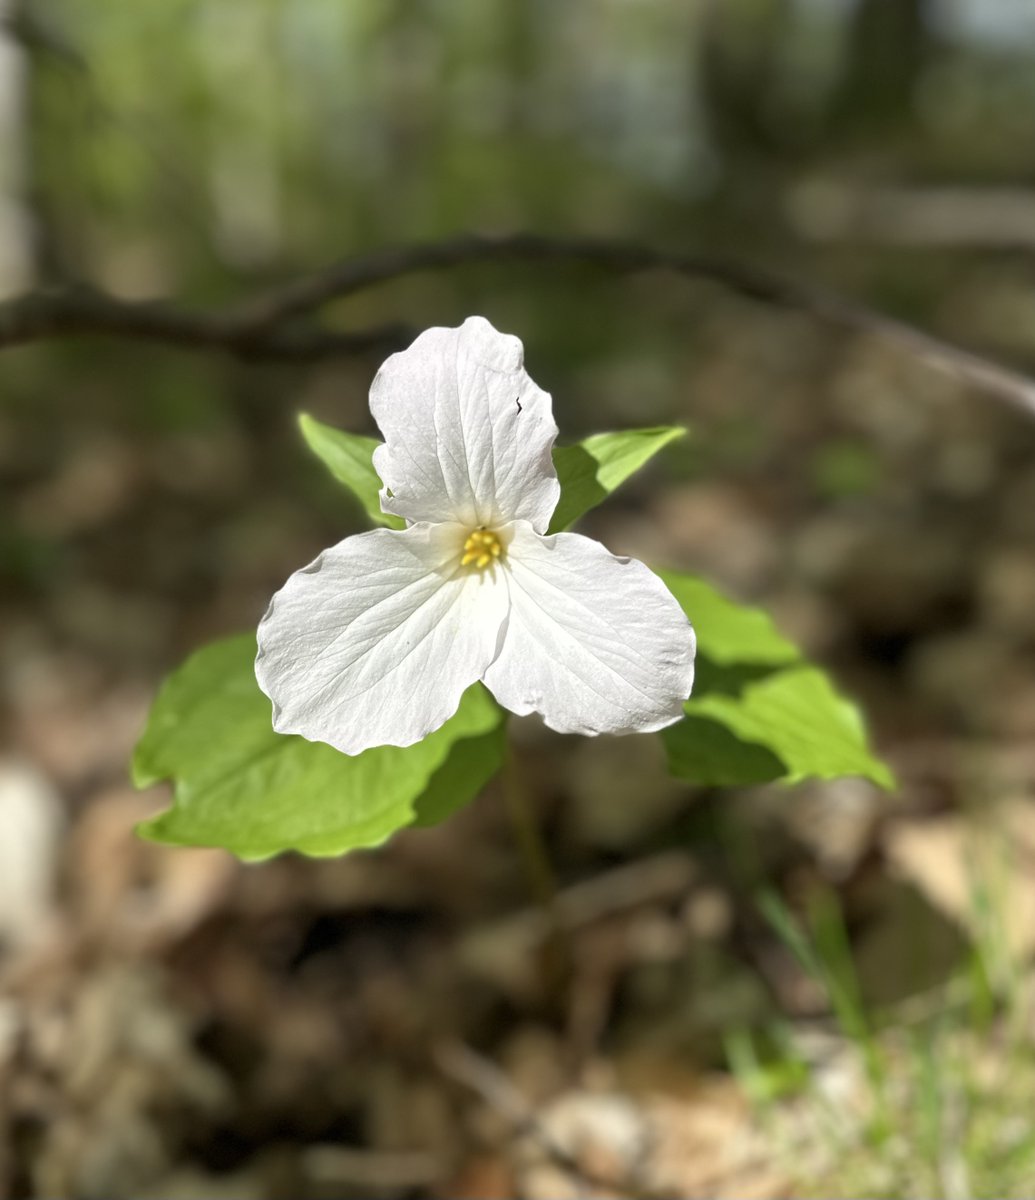 With trilliums in full bloom, today is a perfect day for a nature walk. Research shows that spending time outdoors, soaking in nature's beauty during a leisurely walk, can lower blood pressure, reduce stress, & improve overall #heart health.#HeartHealth #NatureWalks #Trillium